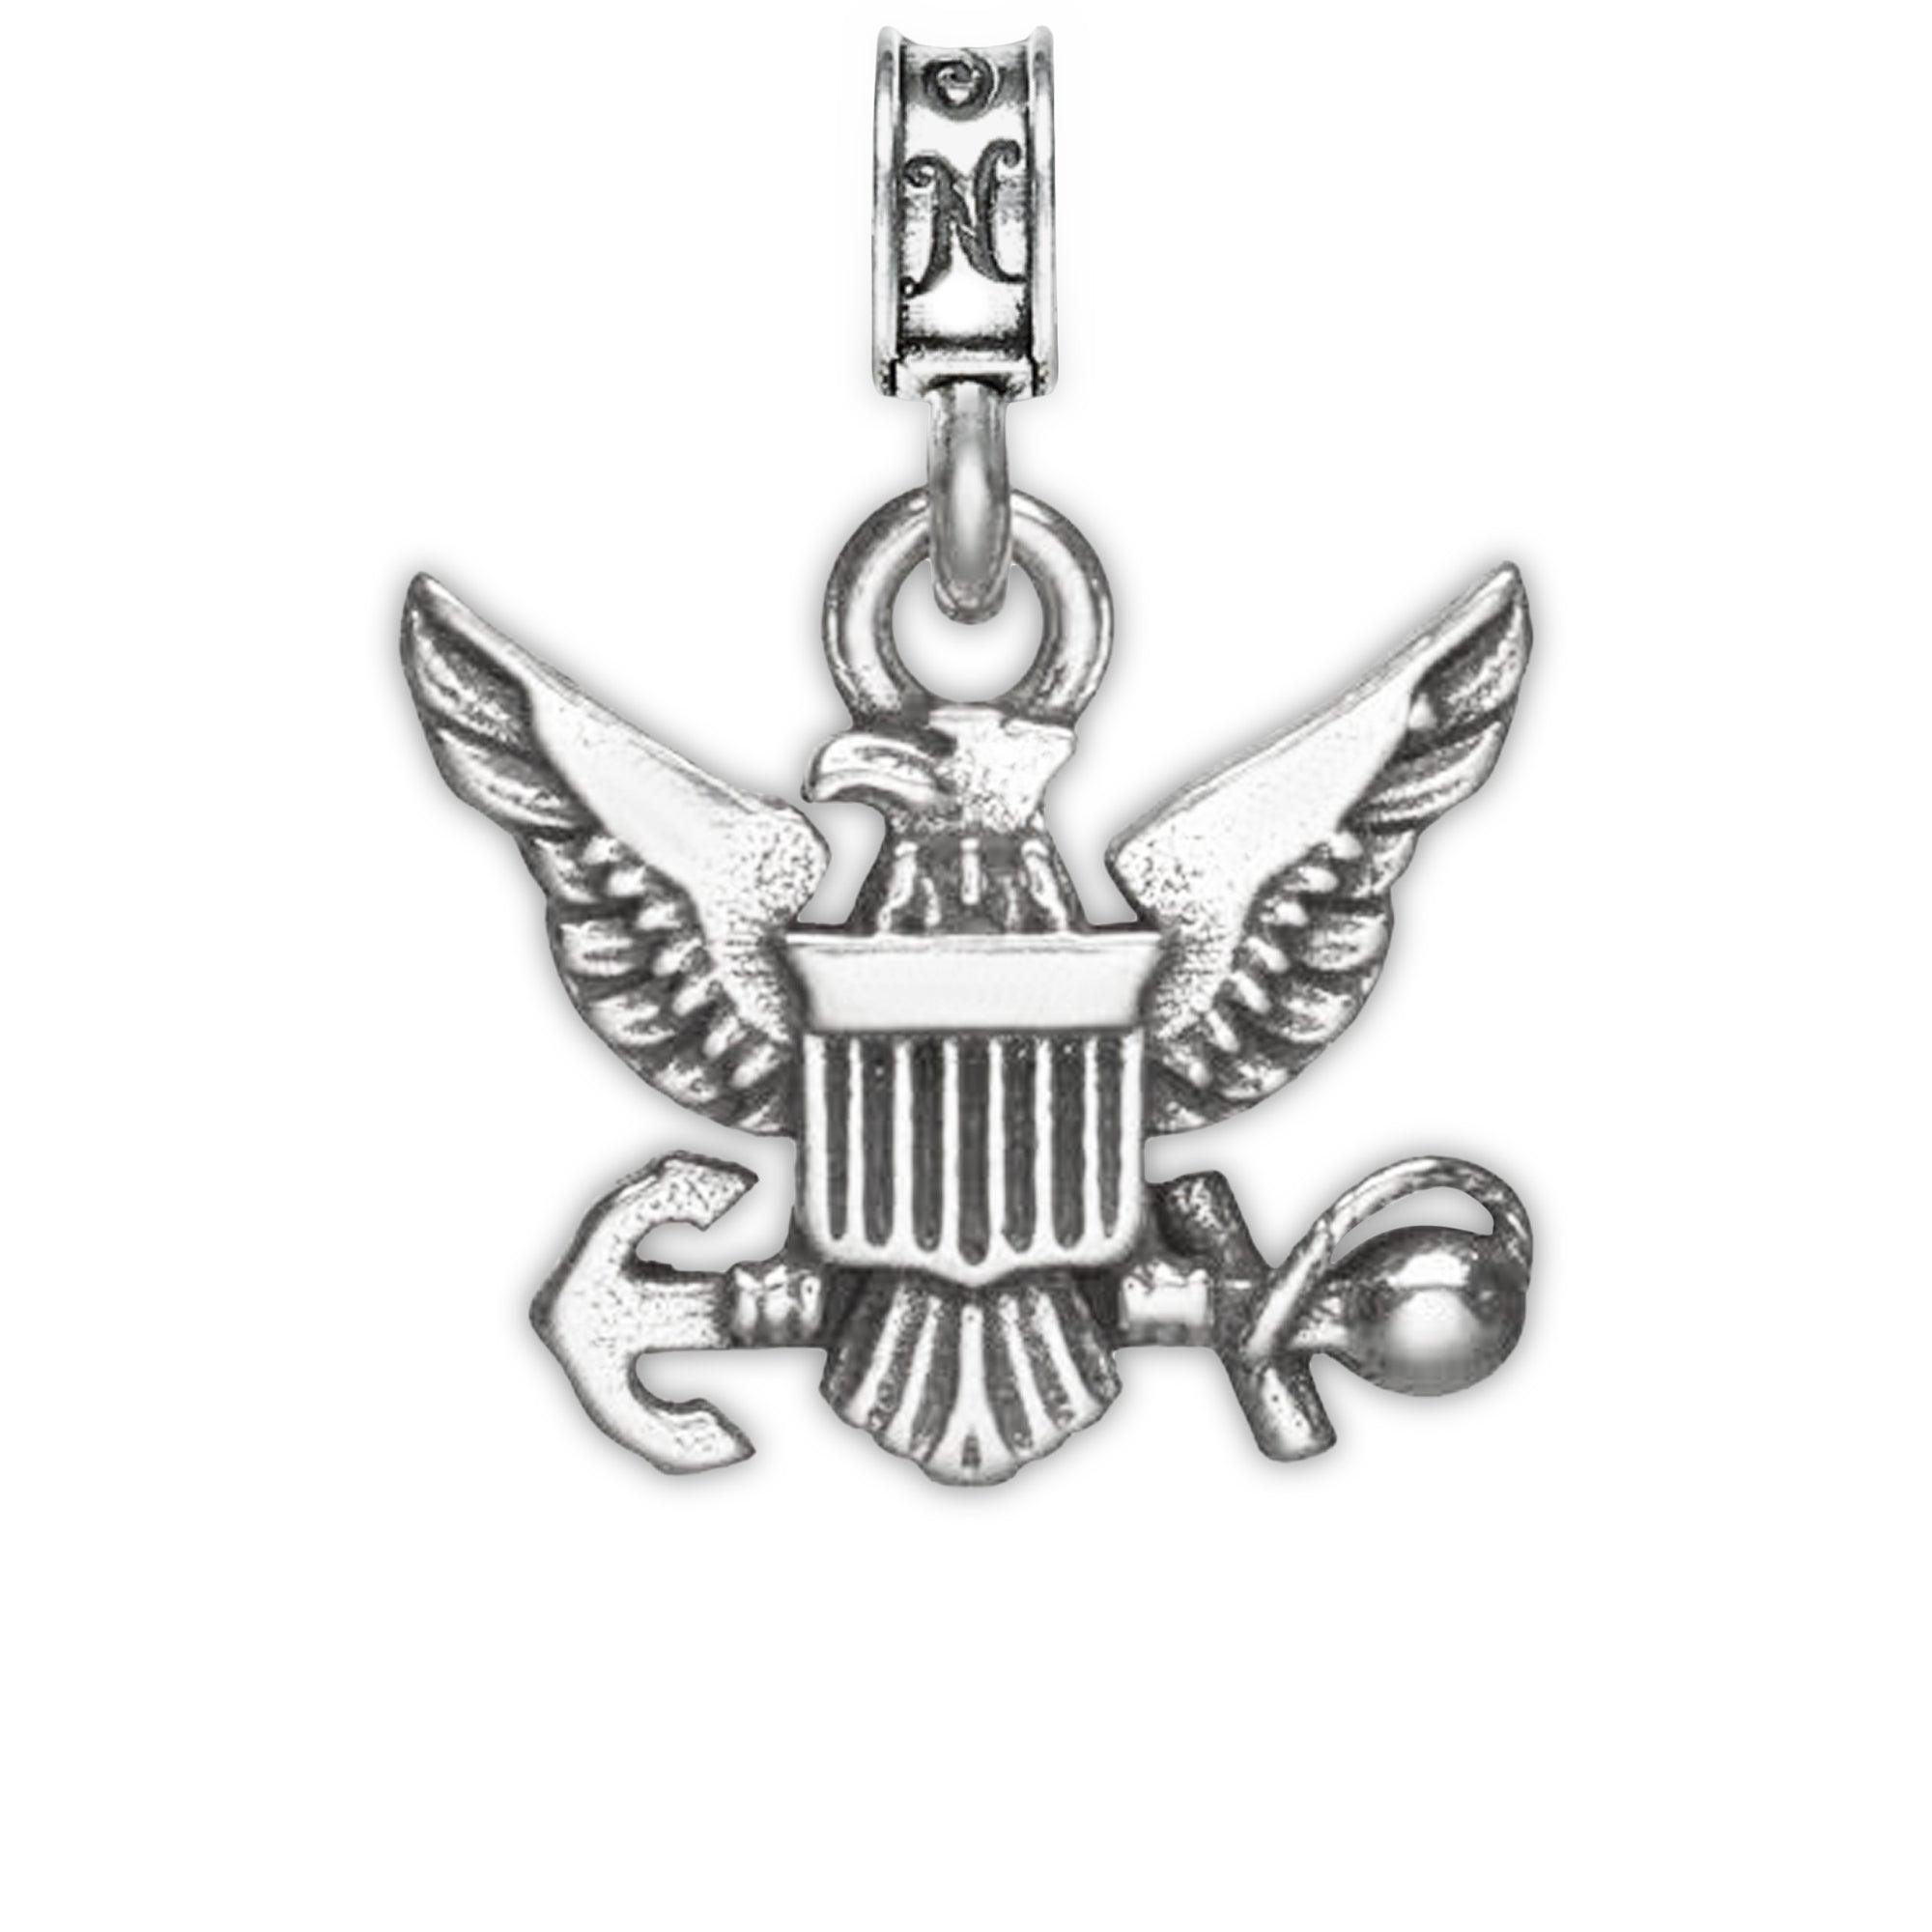 Military Jewelry, Military Charms, Navy, USN, Military Gifts, Navy Emblem